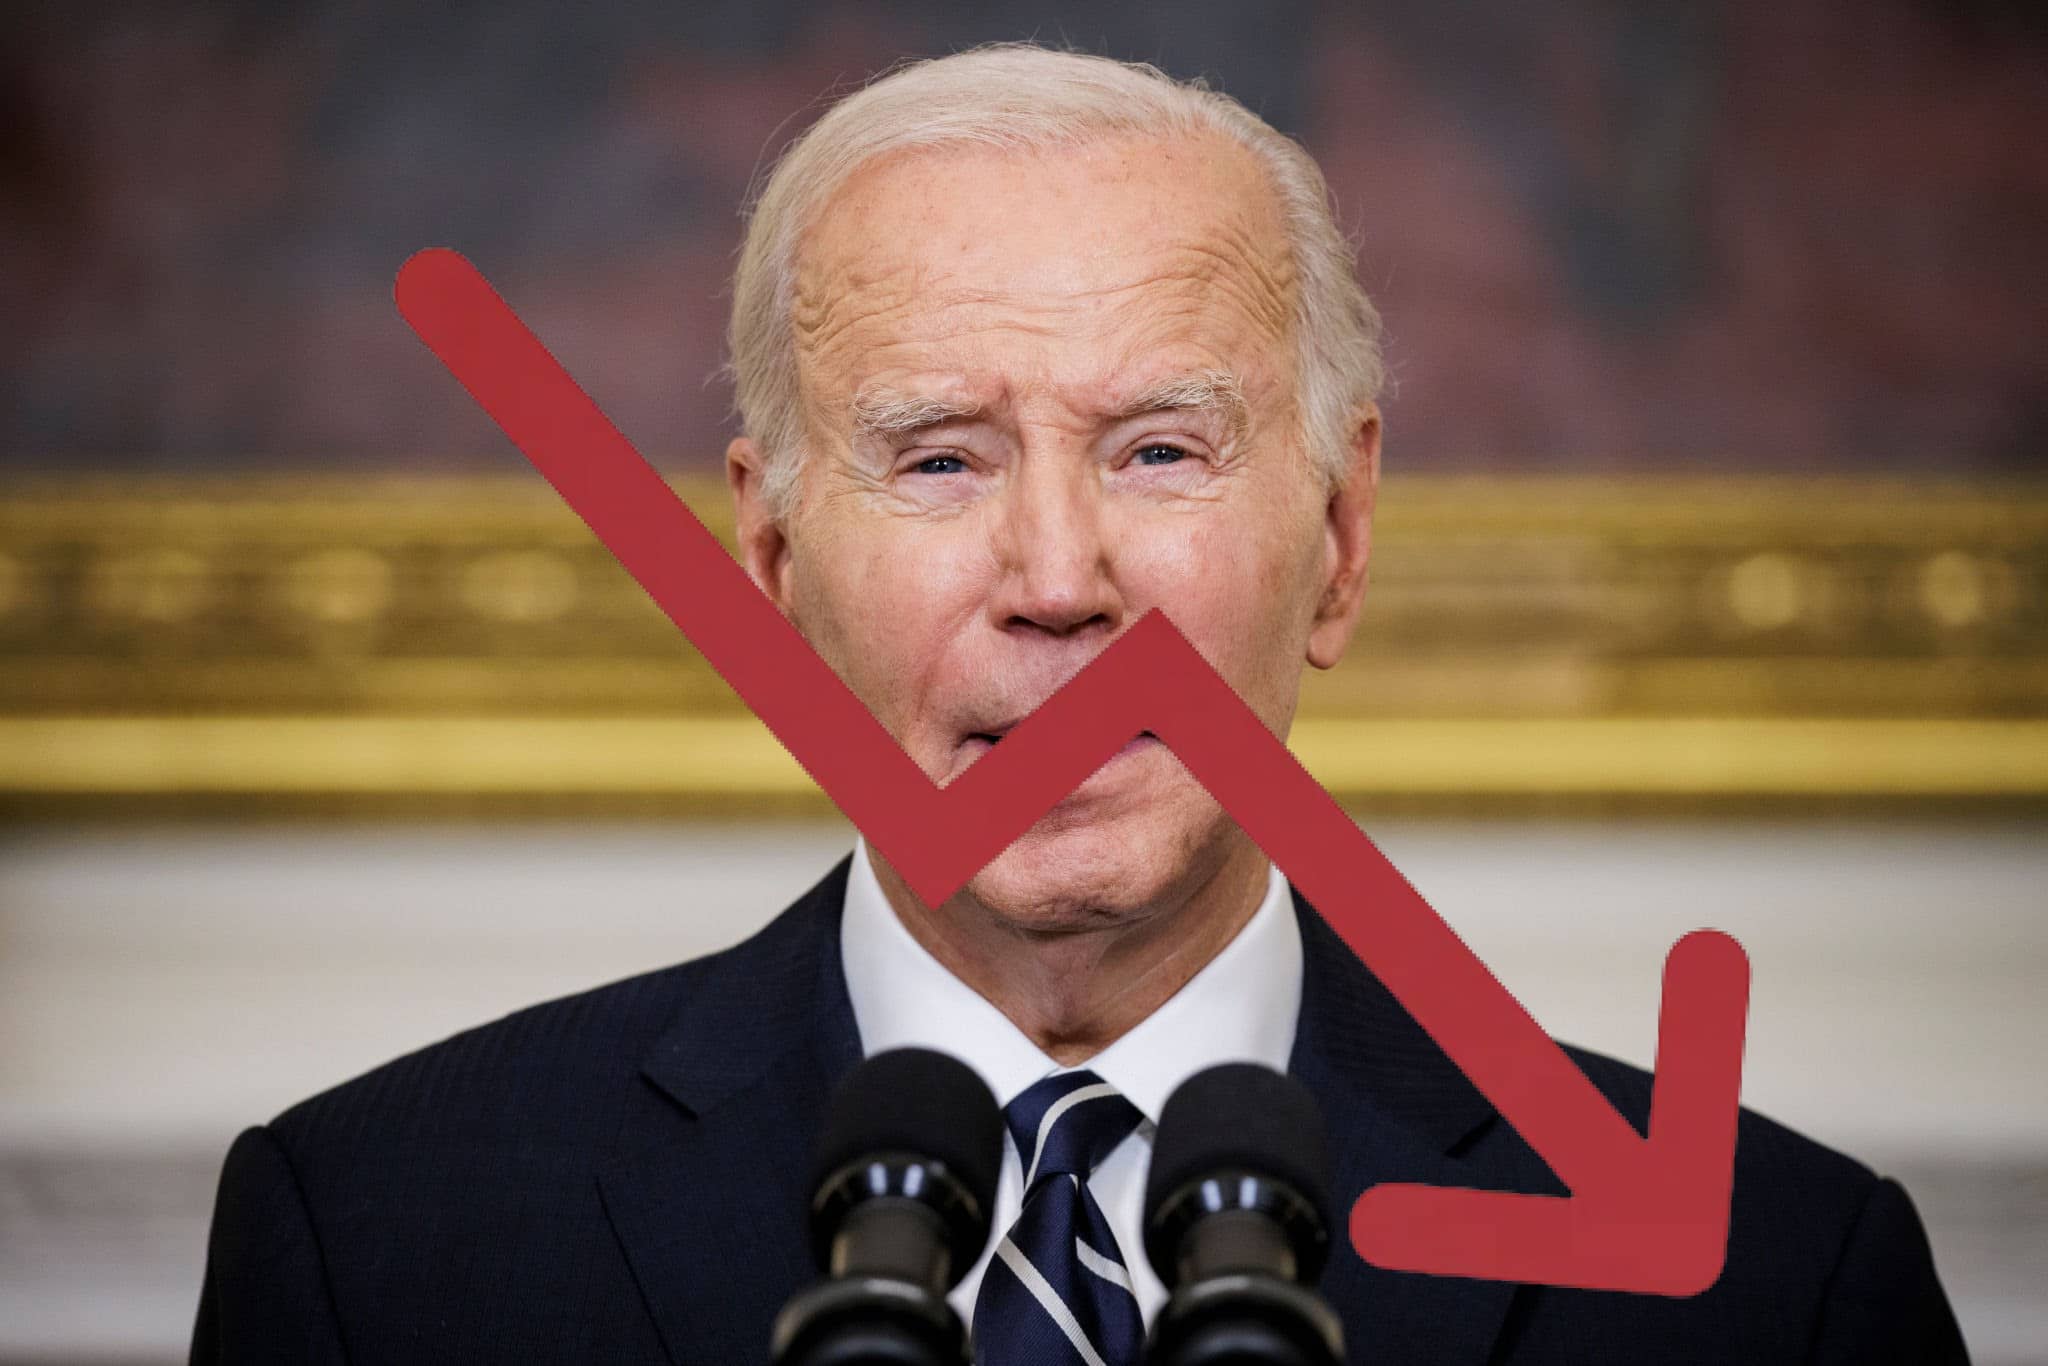 Biden’s Approval Rating Slips to 40% as 70% of Young Voters Disapprove of Israel Policy